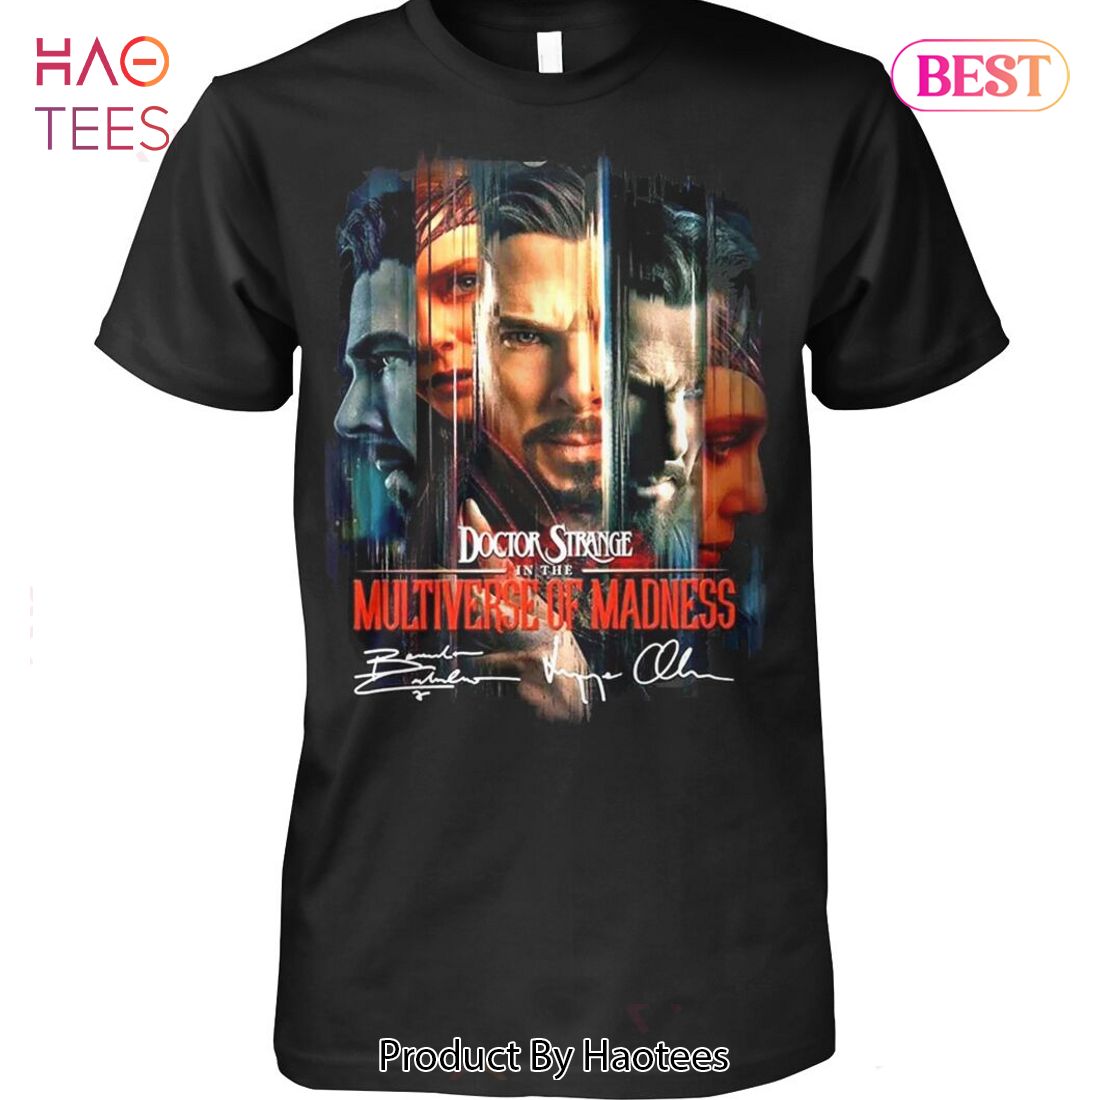 NEW Doctor Strange In The Multiverse Of Madness Unisex T-Shirt